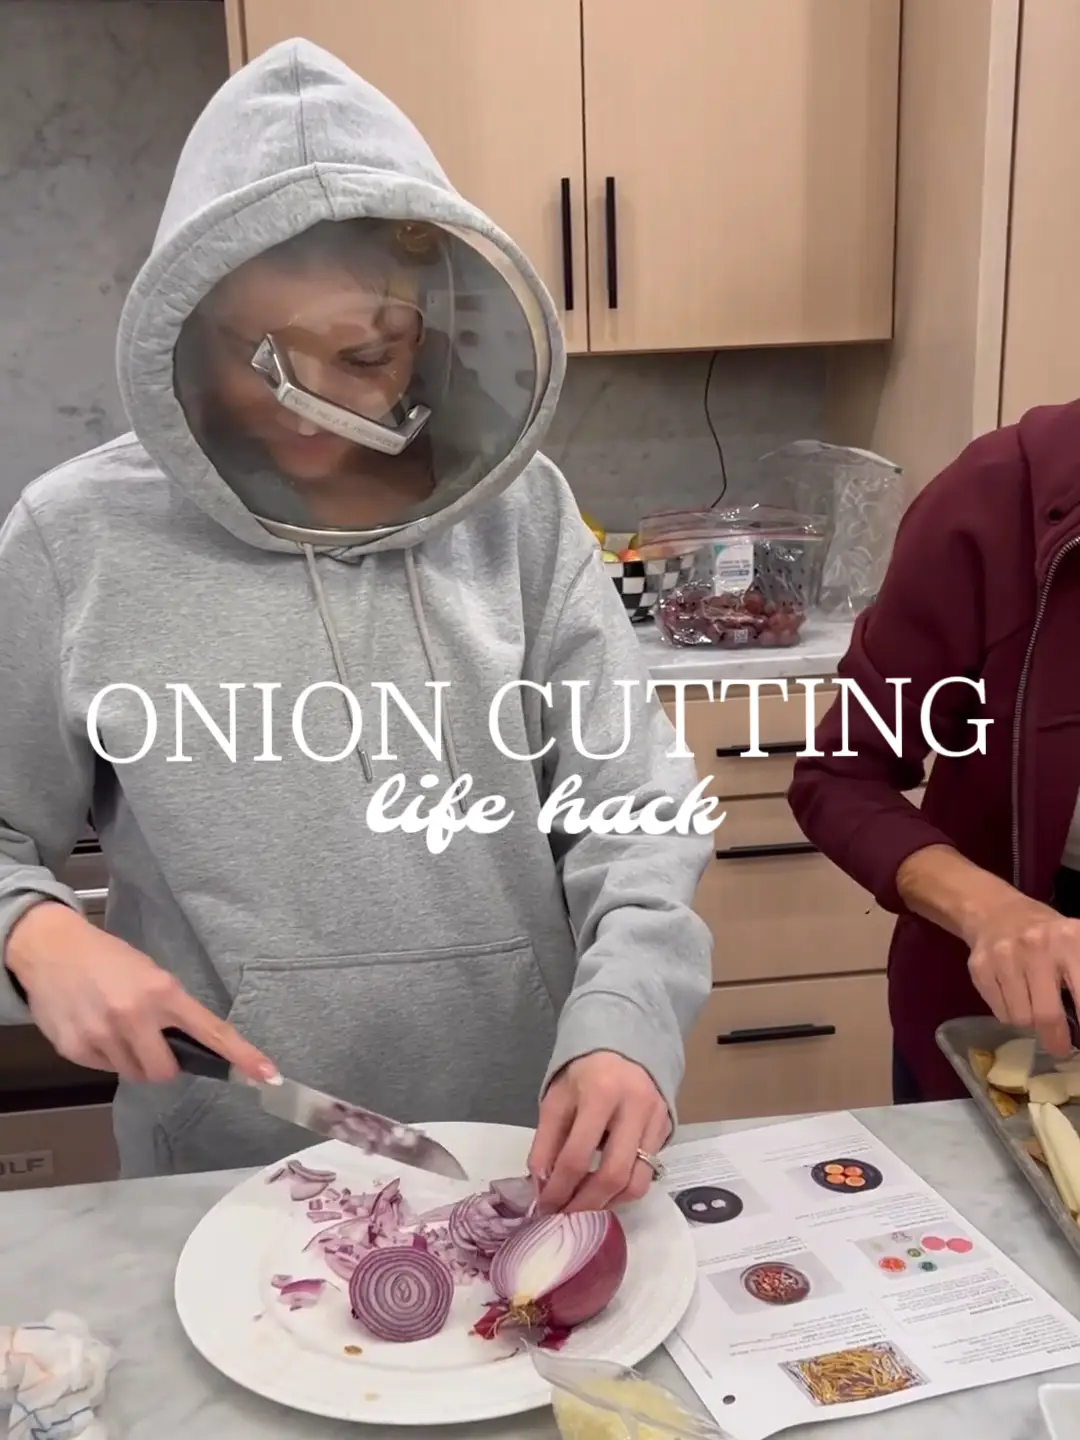 I Tried This TikTok Hack for Slicing Onions—It's Life Changing